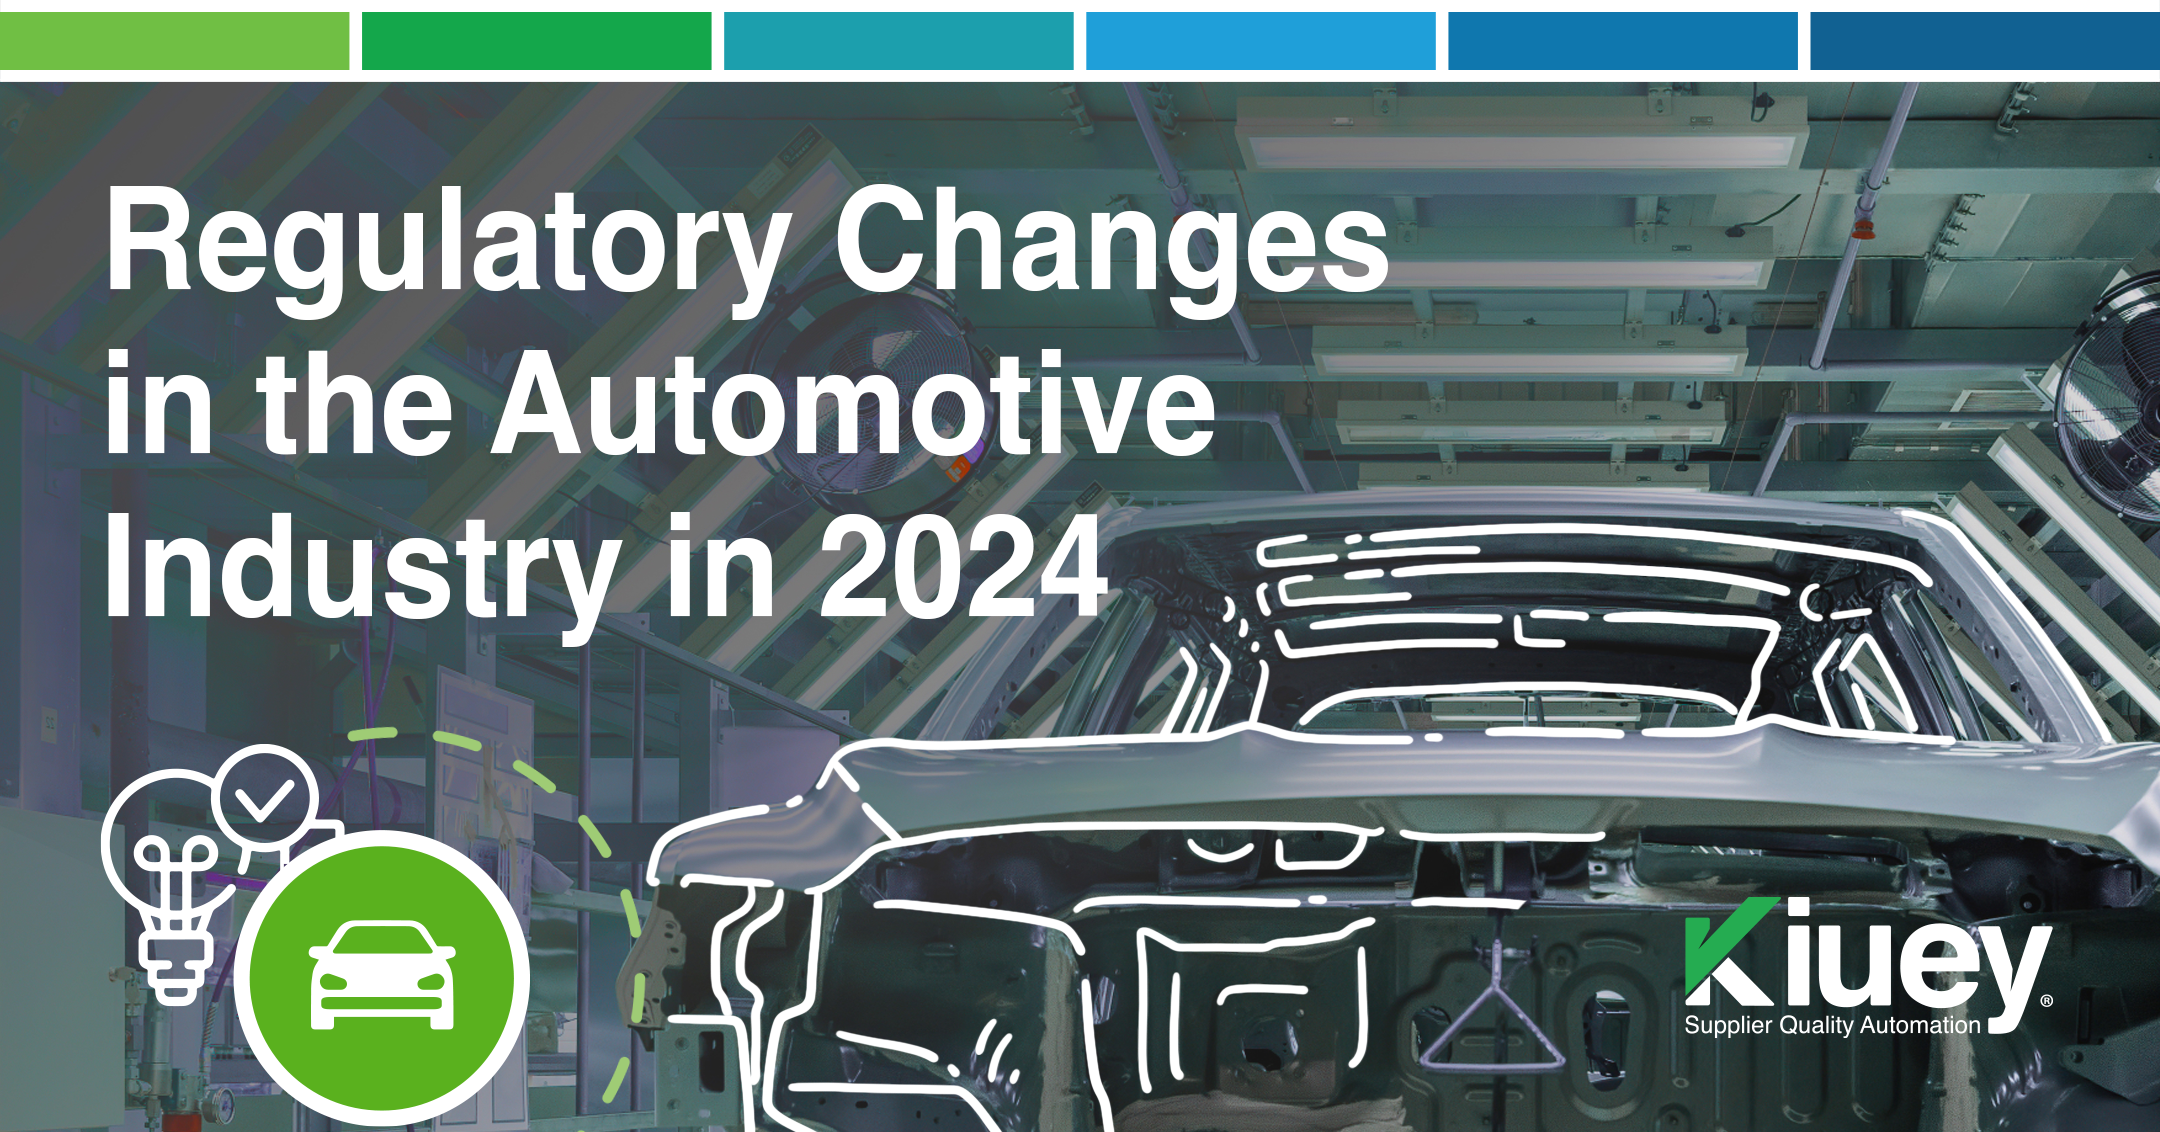 Regulatory Changes in the Automotive Industry in 2024